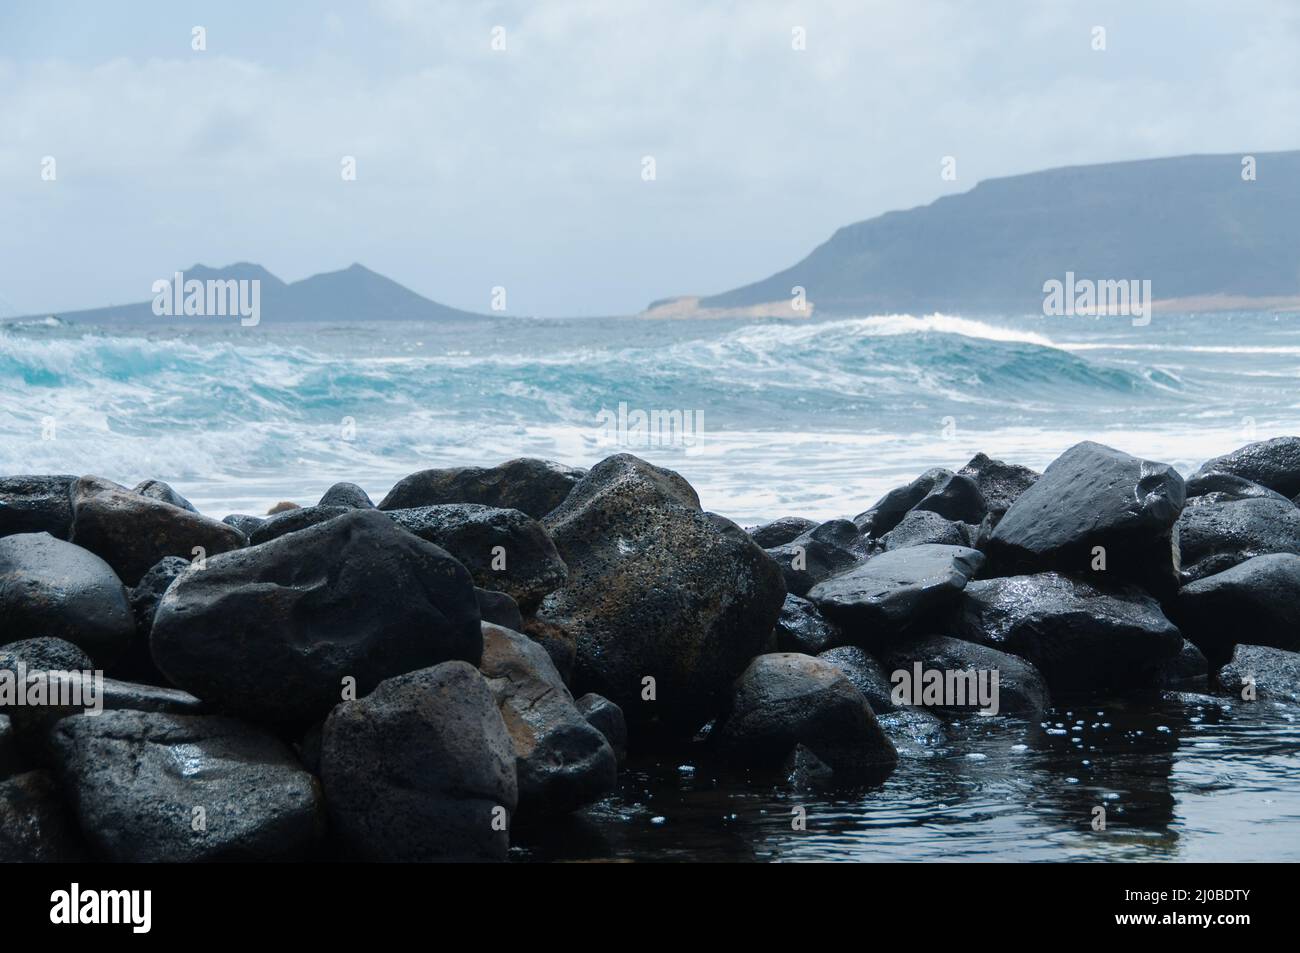 Black rock stone coast in front of rough windy sea with waves Stock Photo